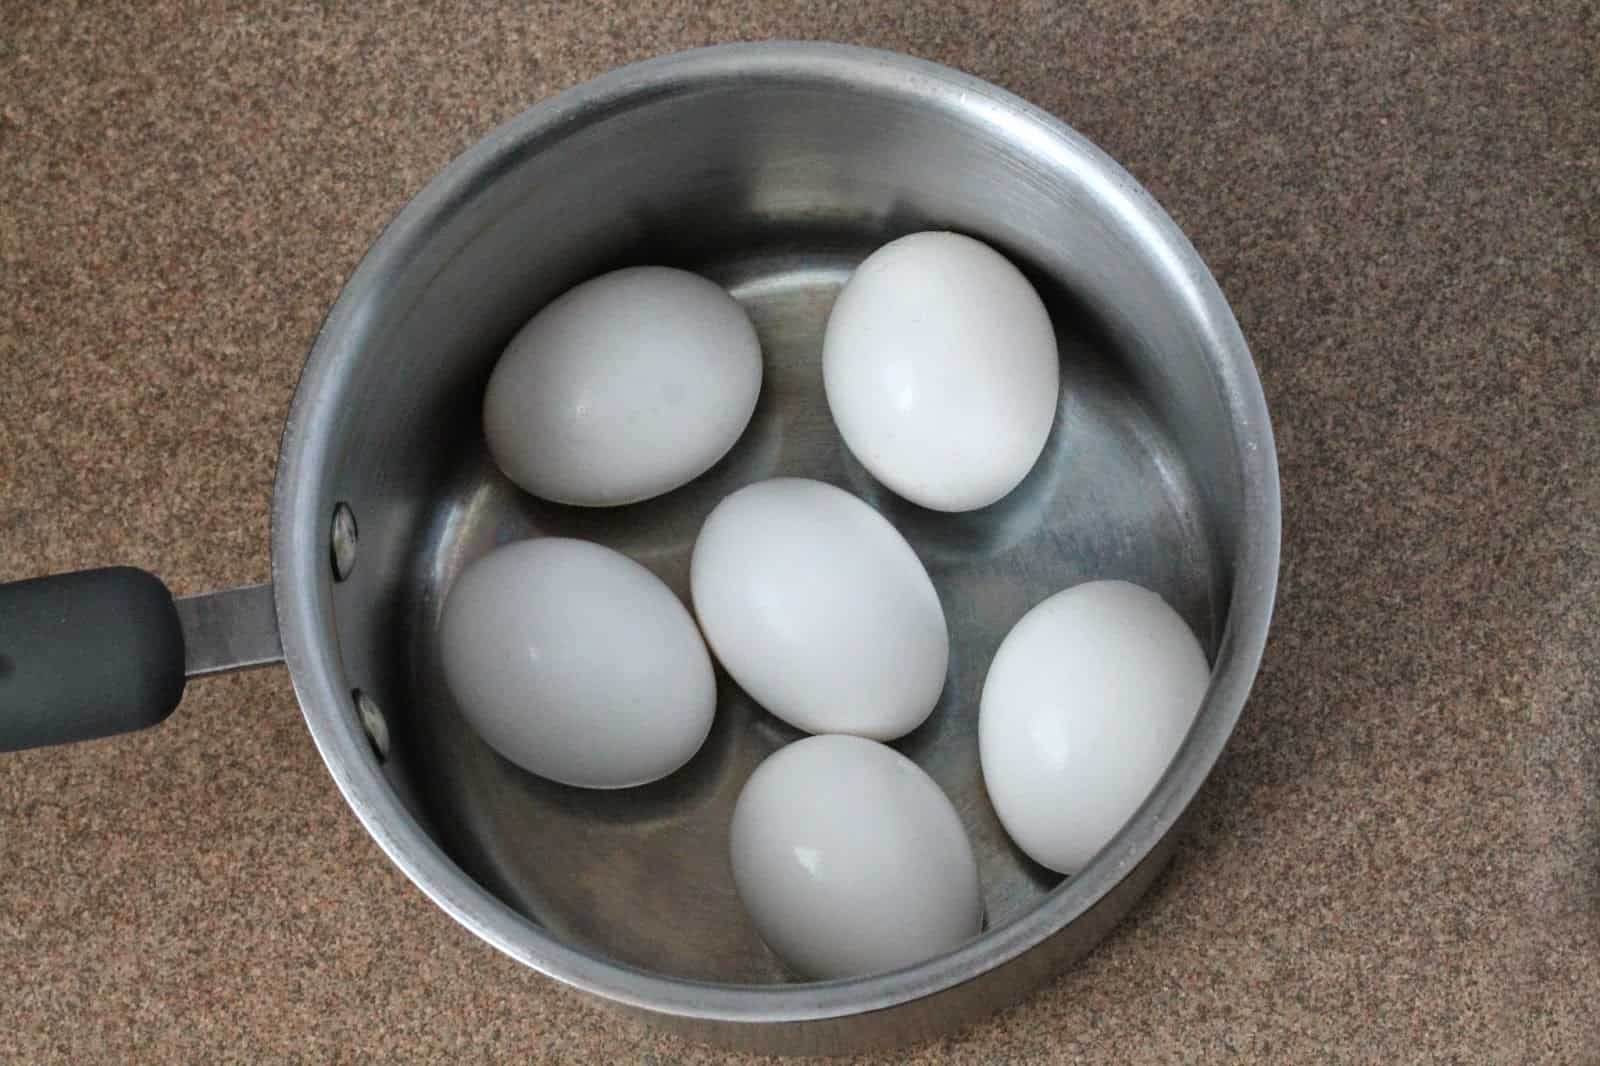 How to Boil Eggs - 31